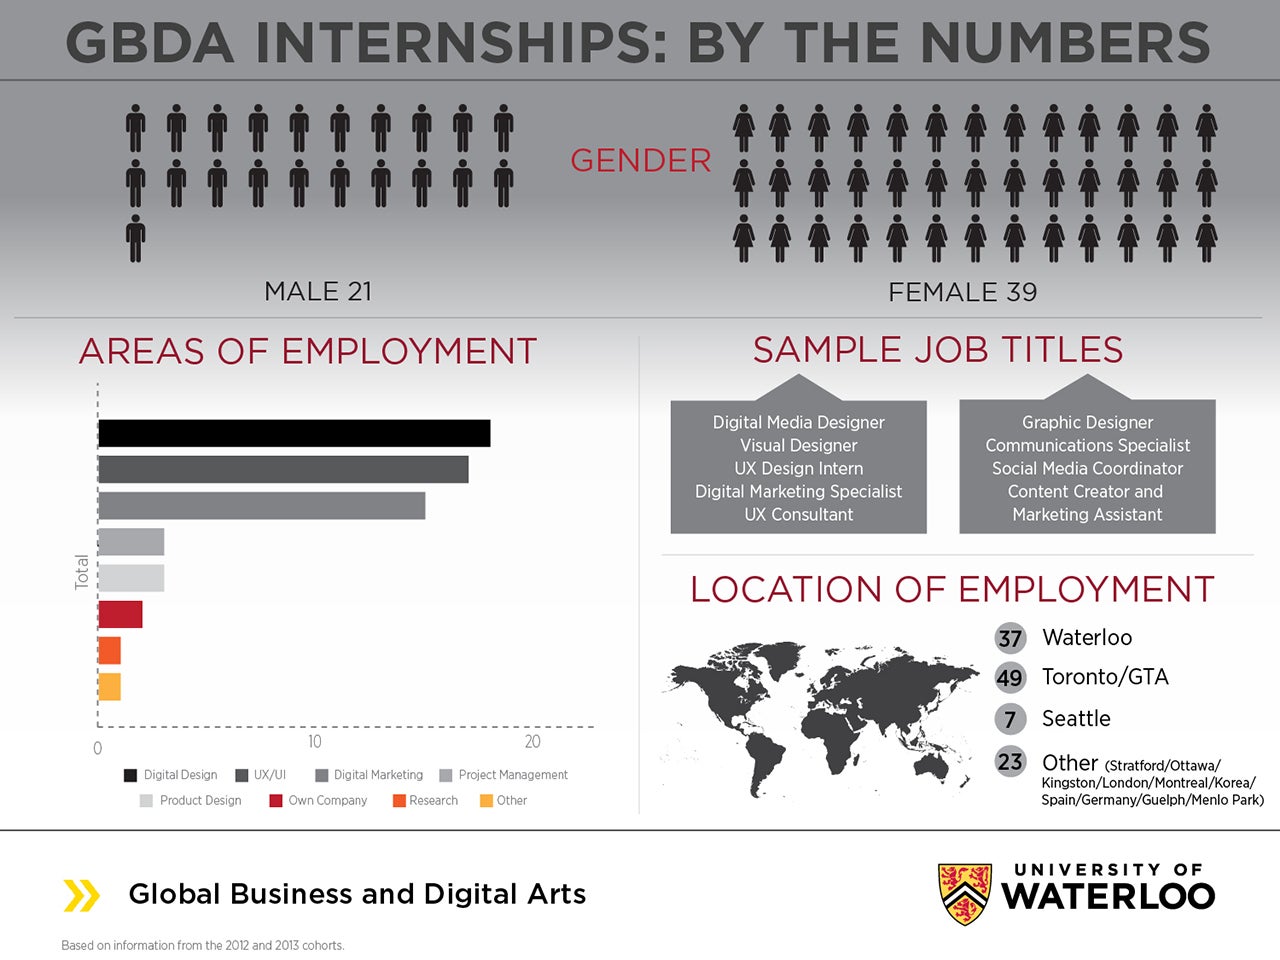 GBDA internships by the numbers